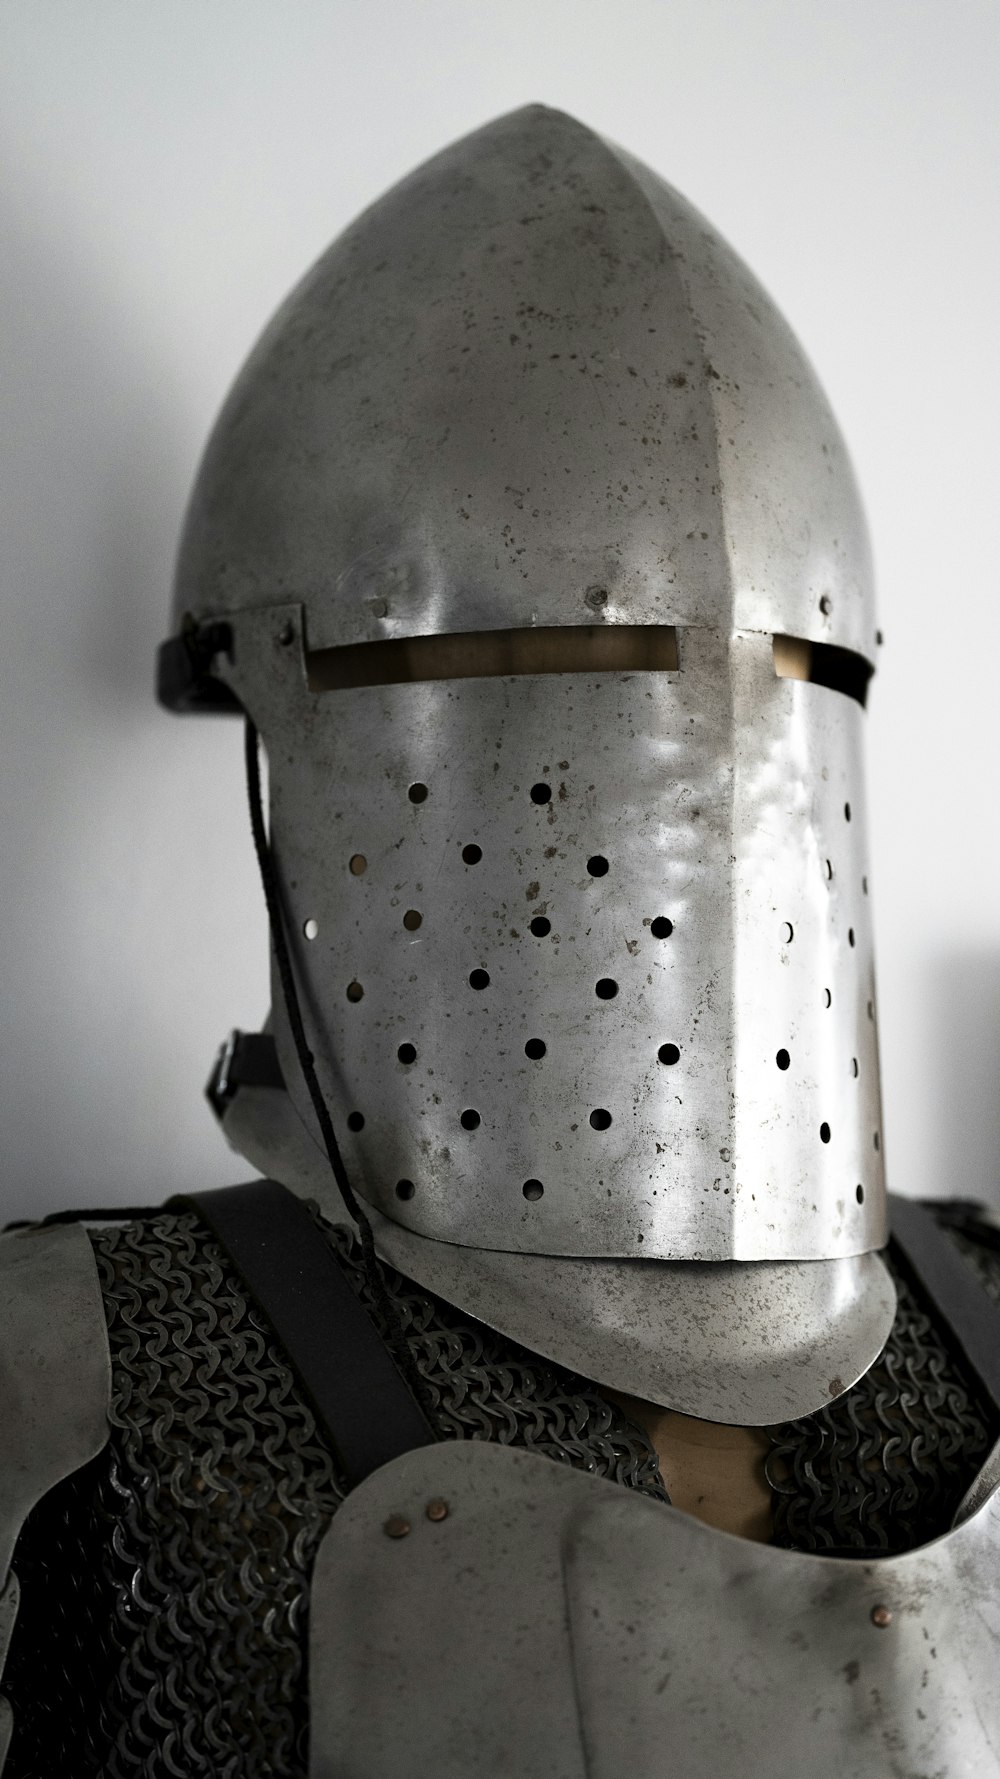 a close up of a knight's helmet and armor